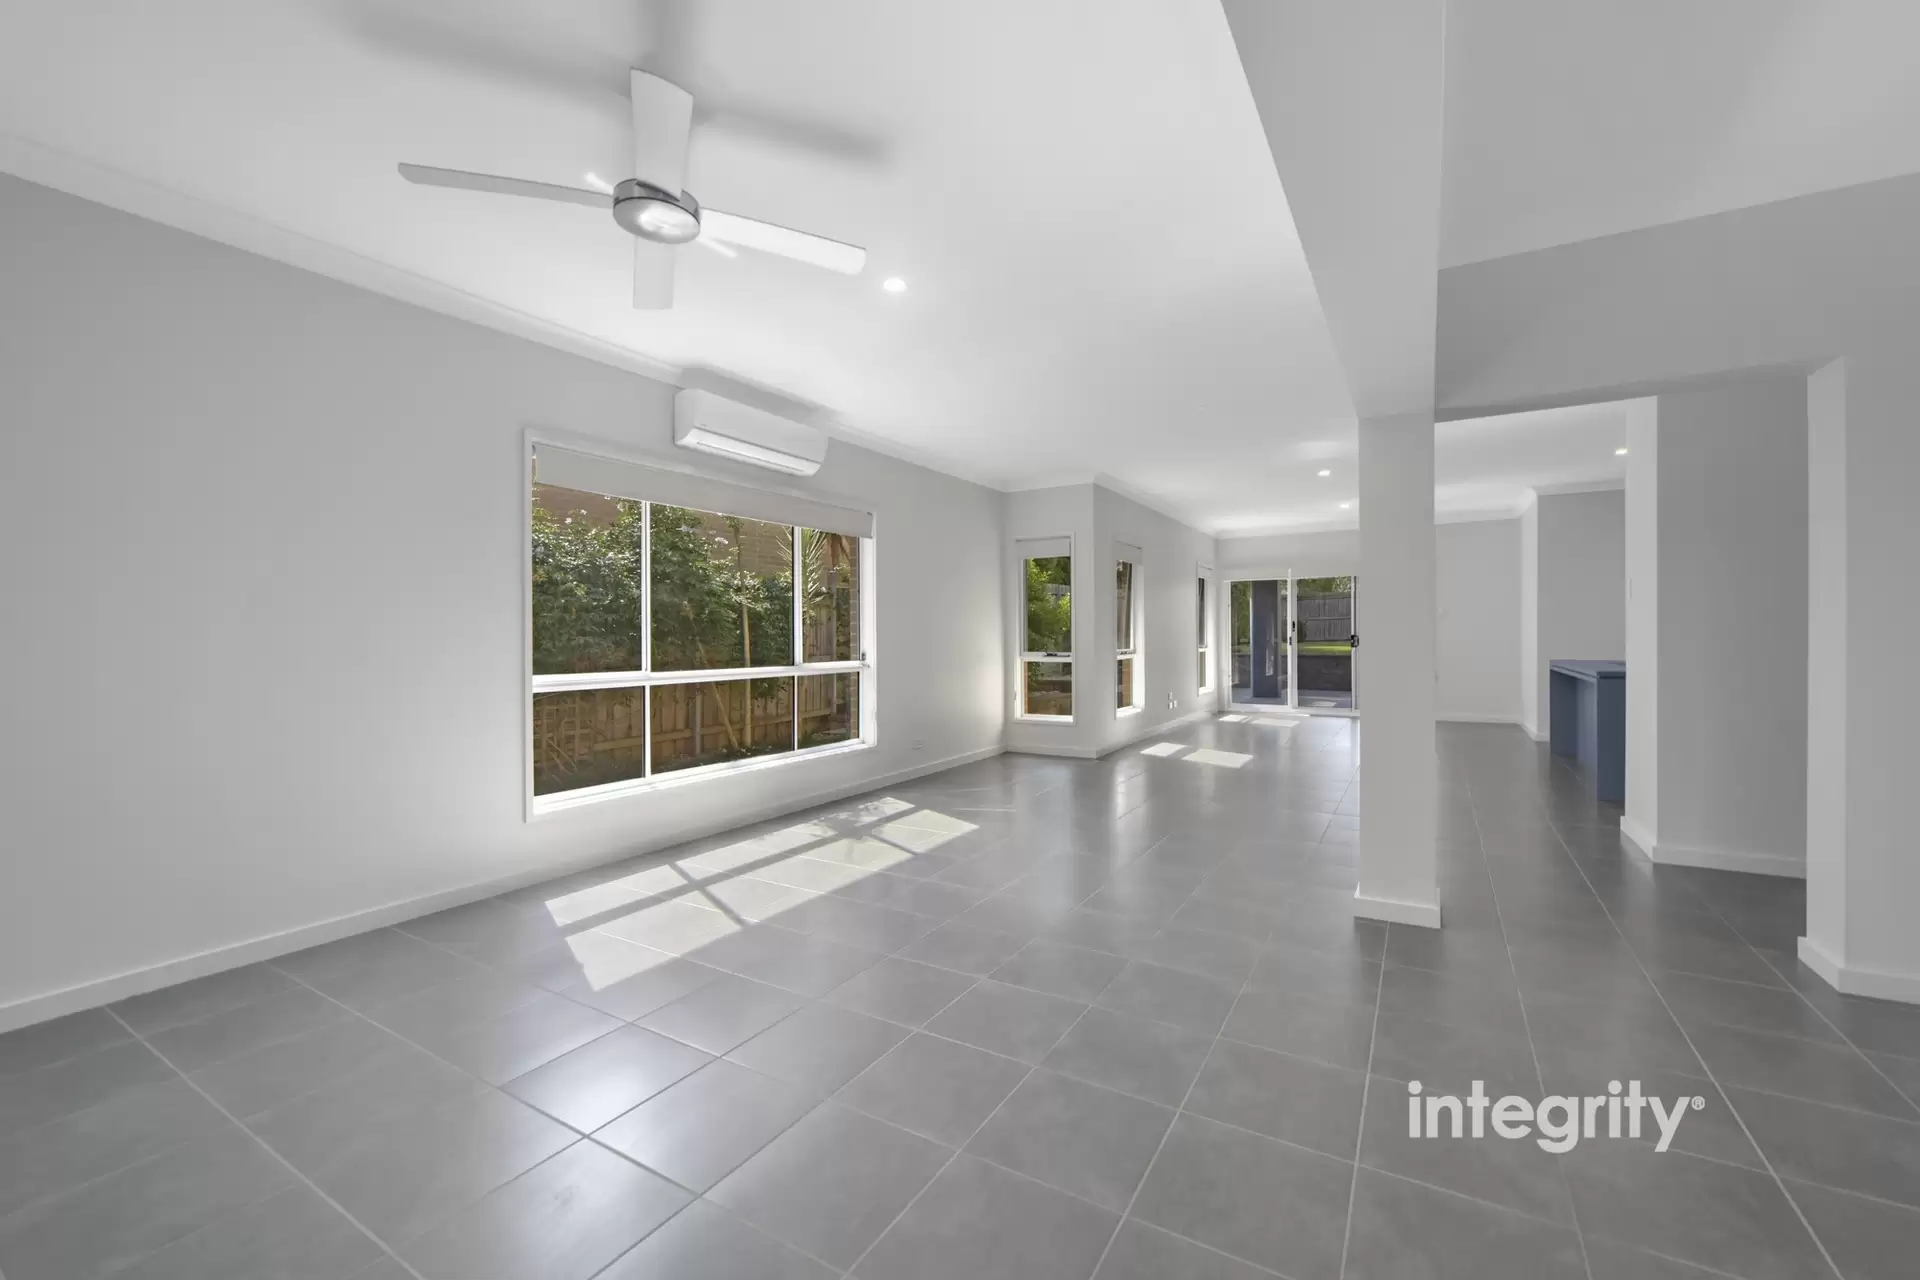 8 Bayswood Avenue, Vincentia For Sale by Integrity Real Estate - image 4